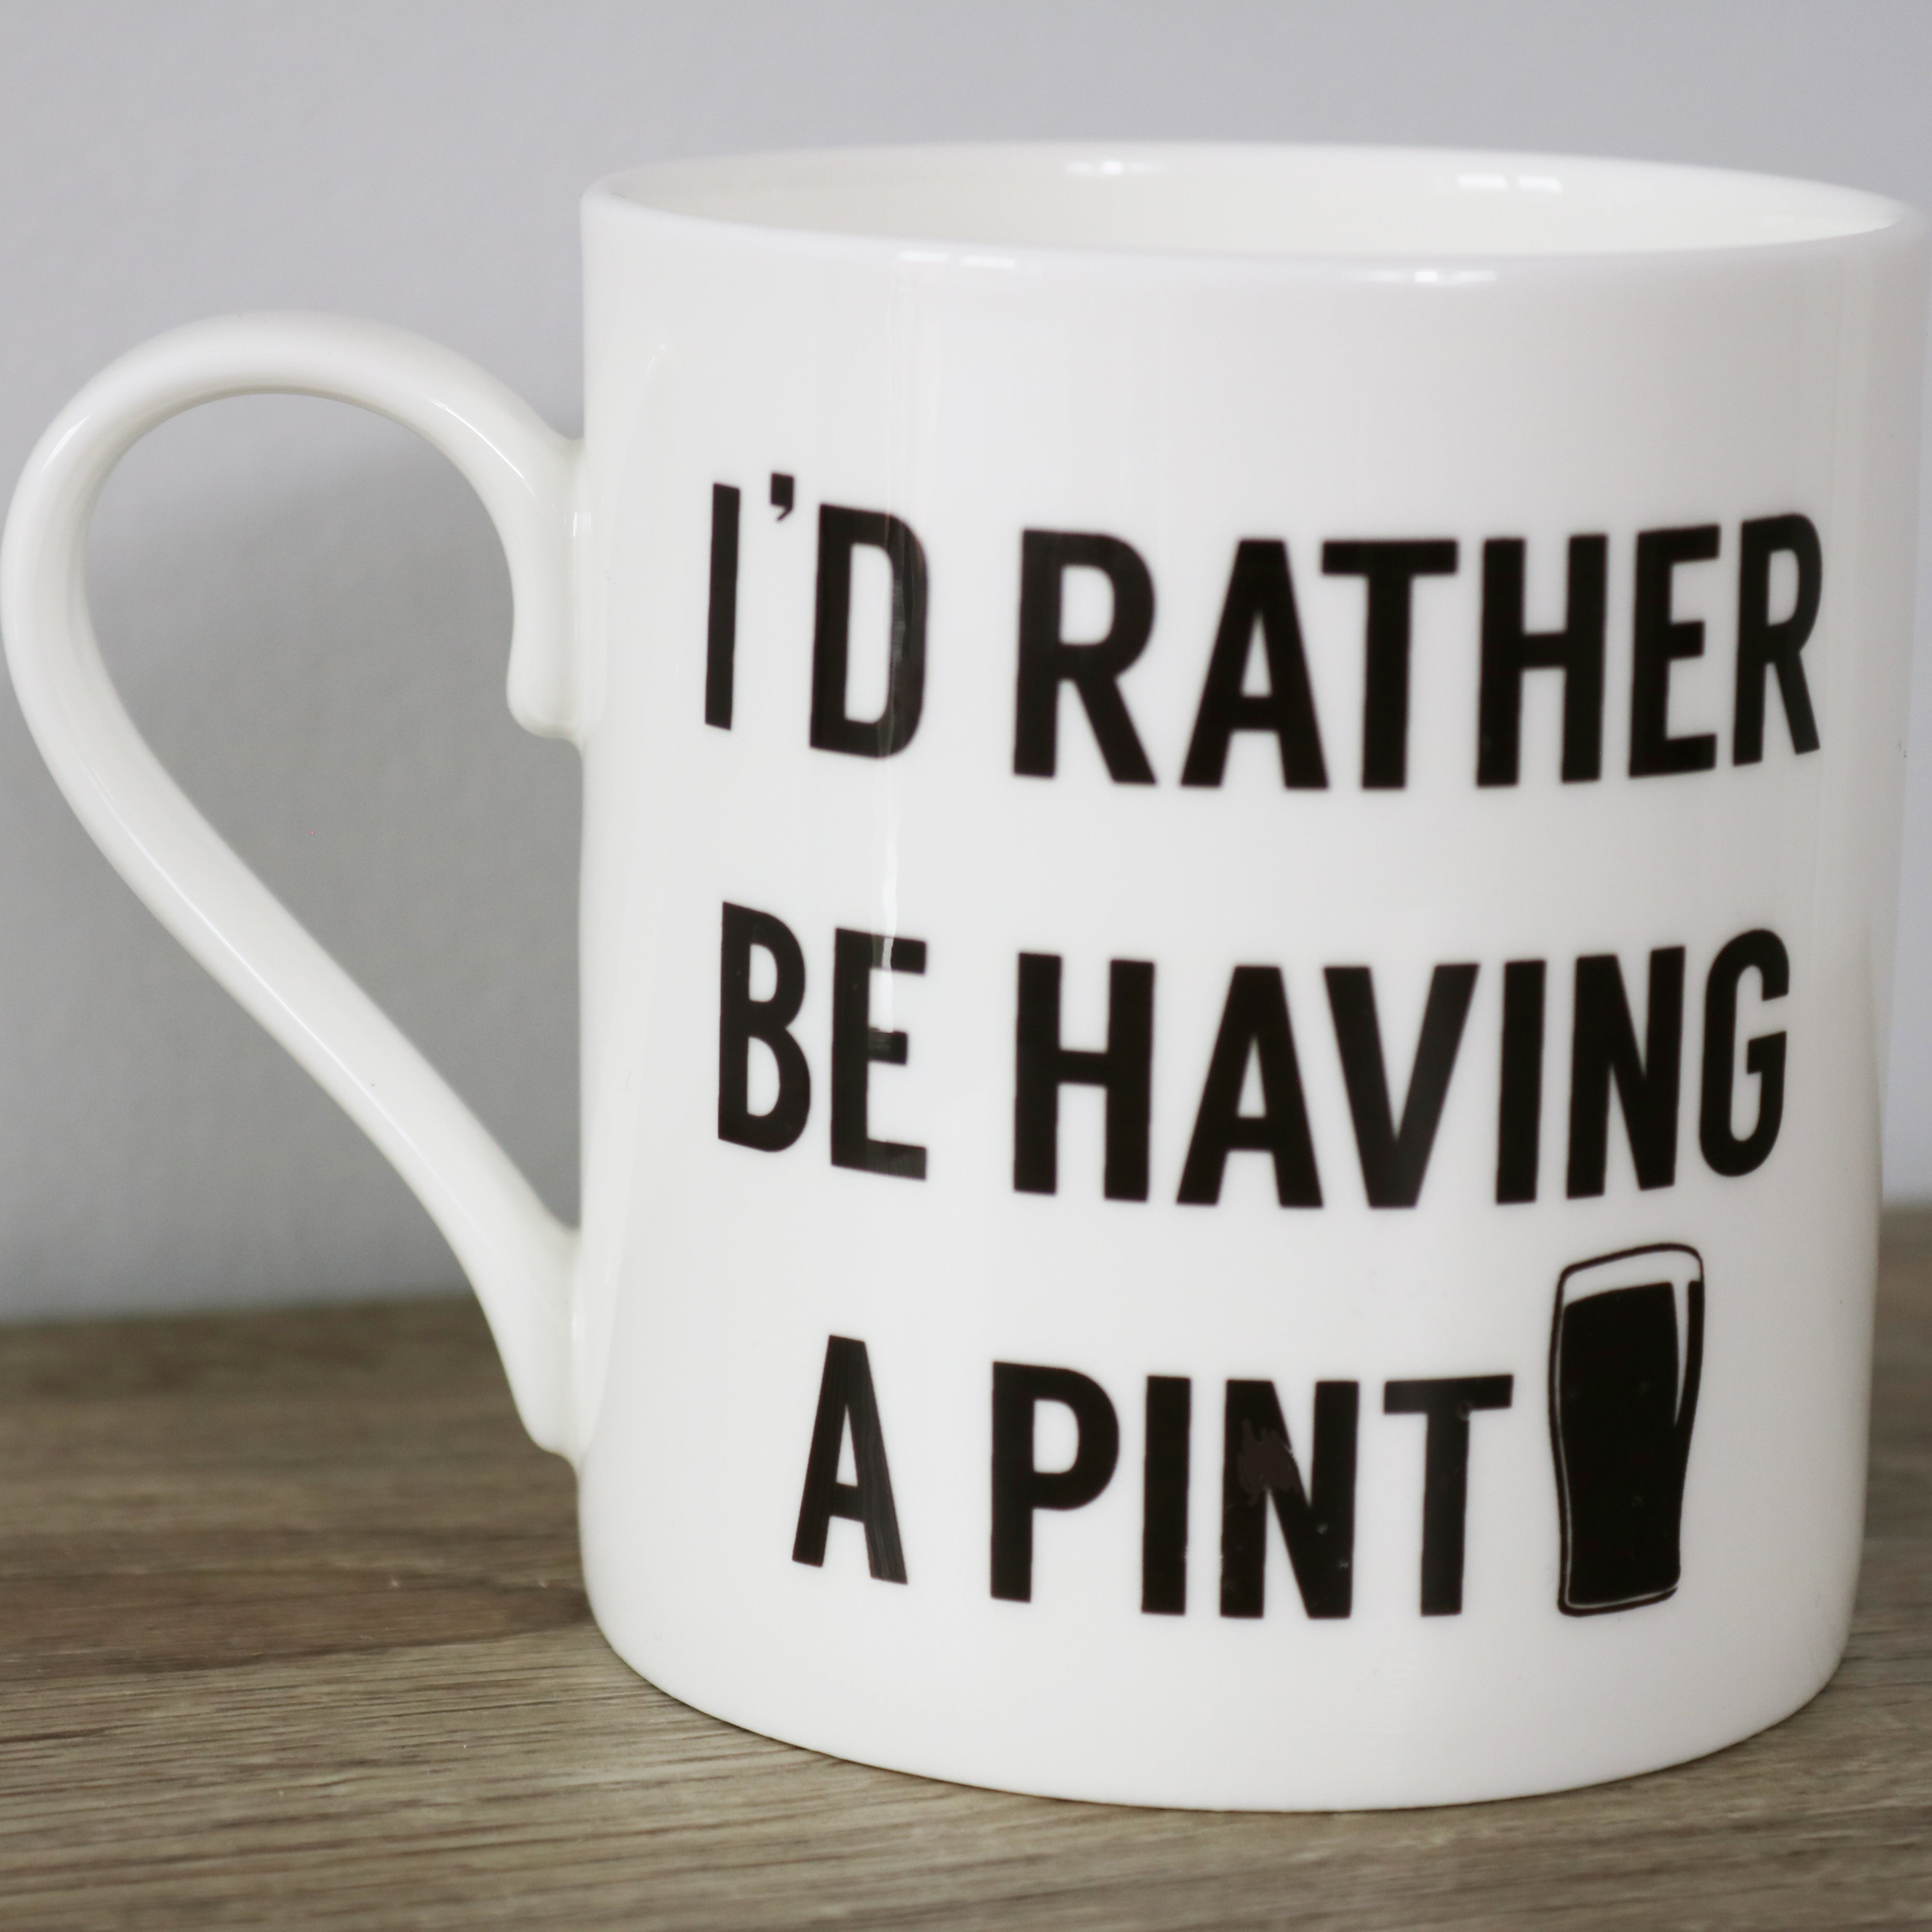 I'd Rather be Having a Pint